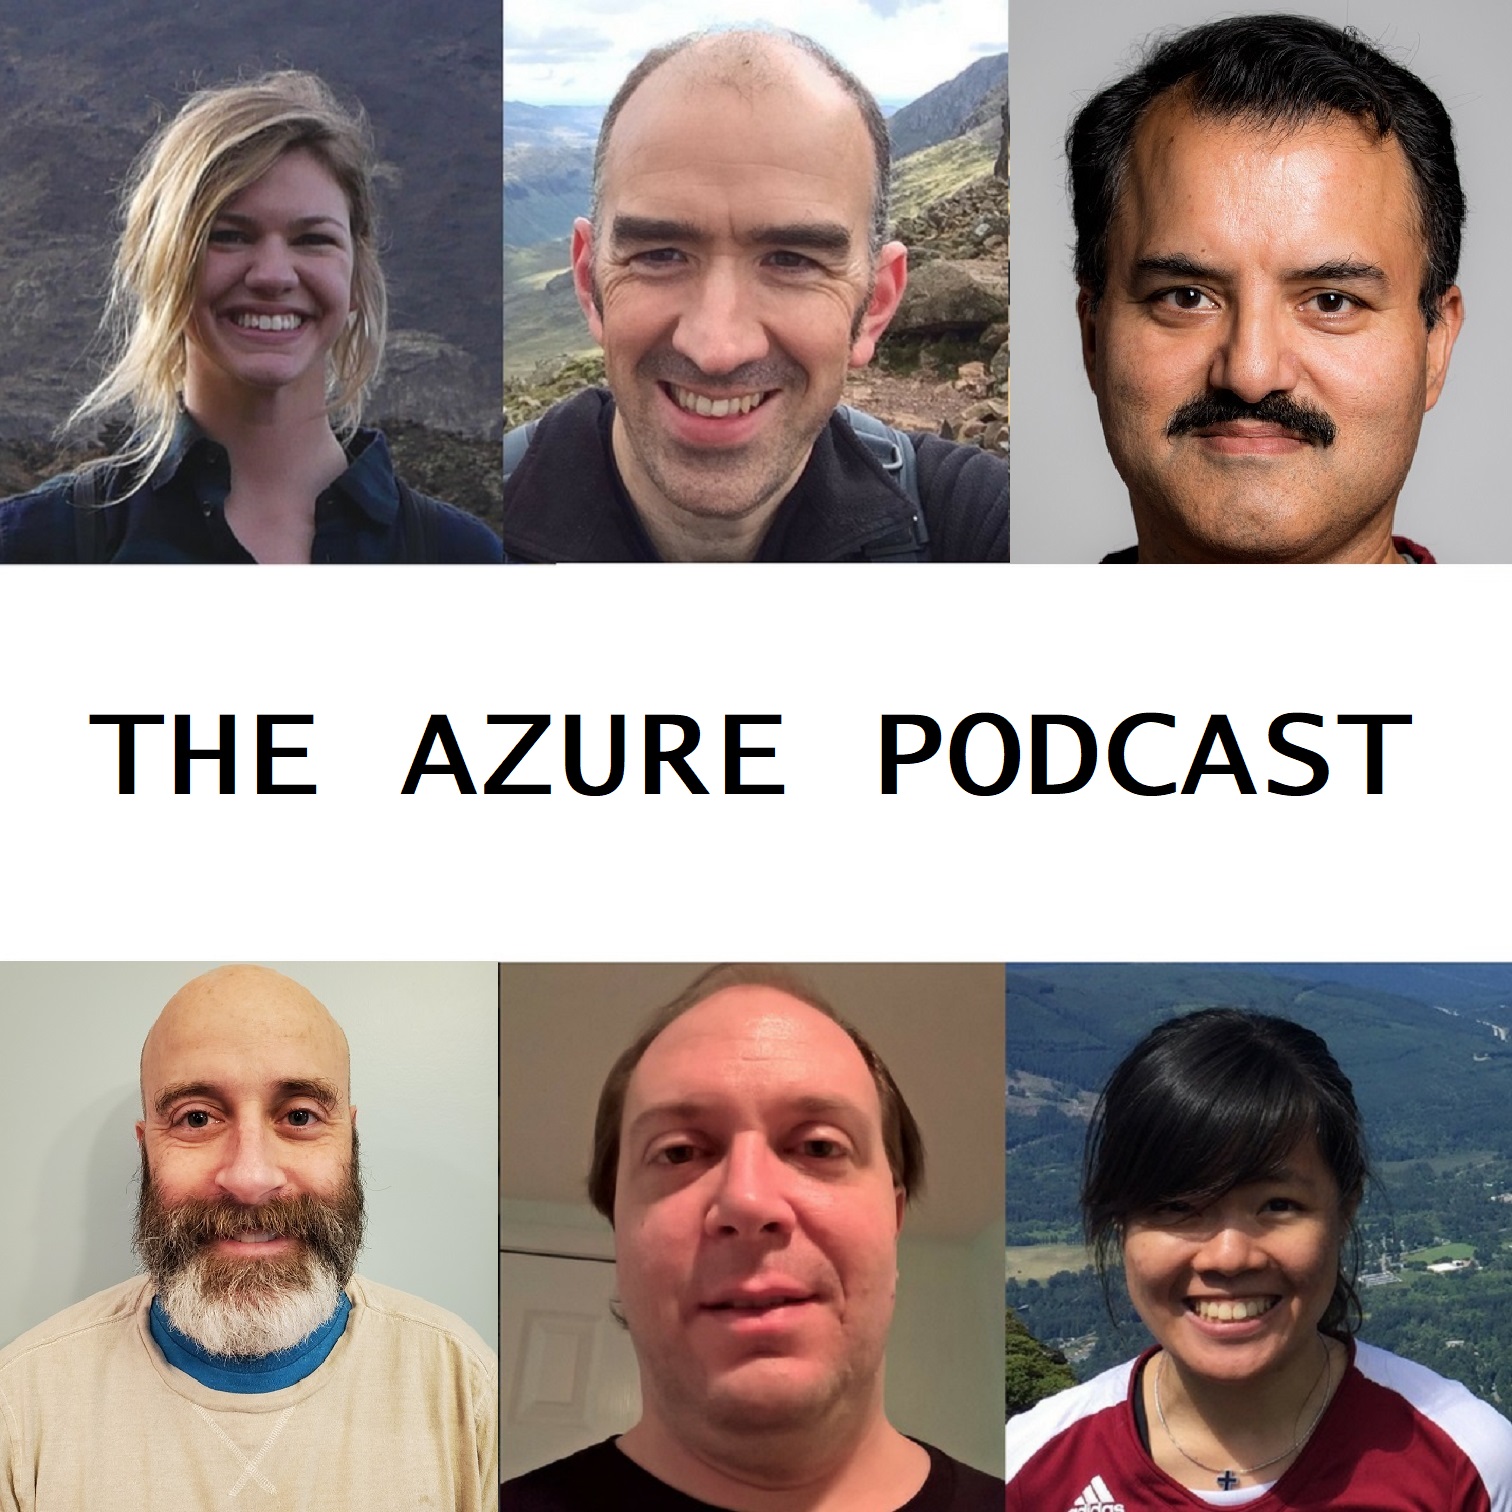 The Azure Podcast